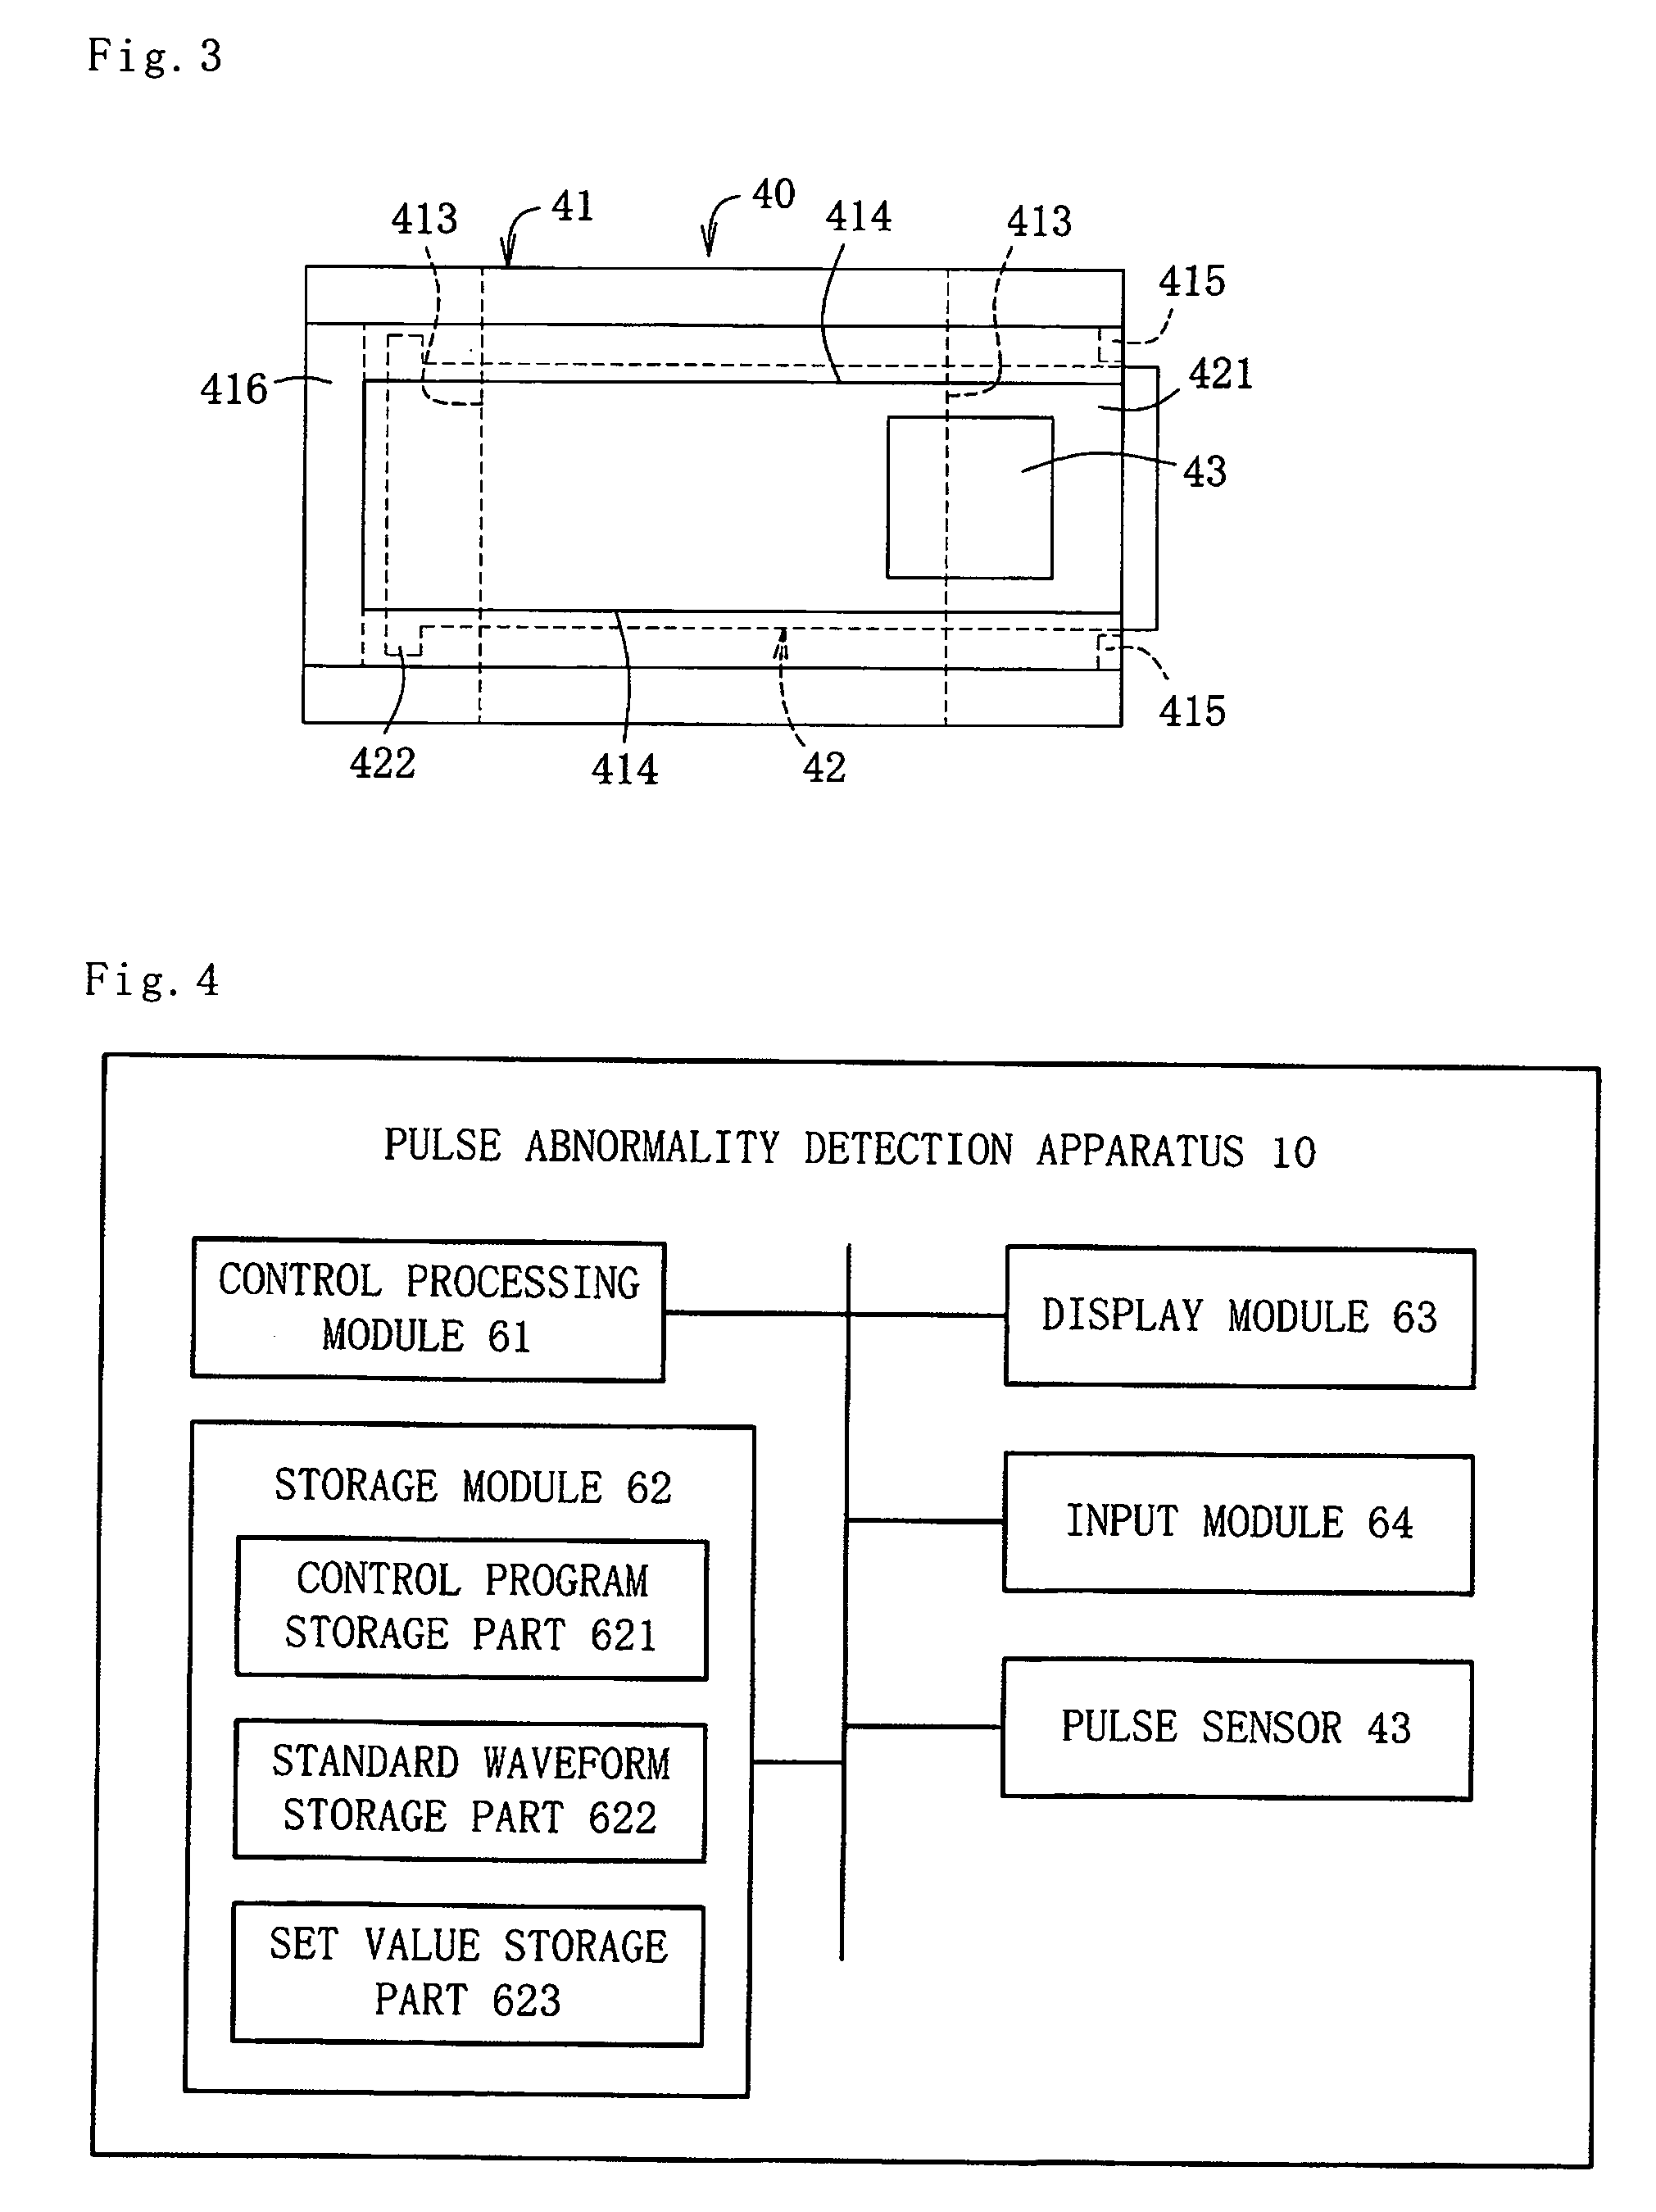 Pulse abnormality detecting device